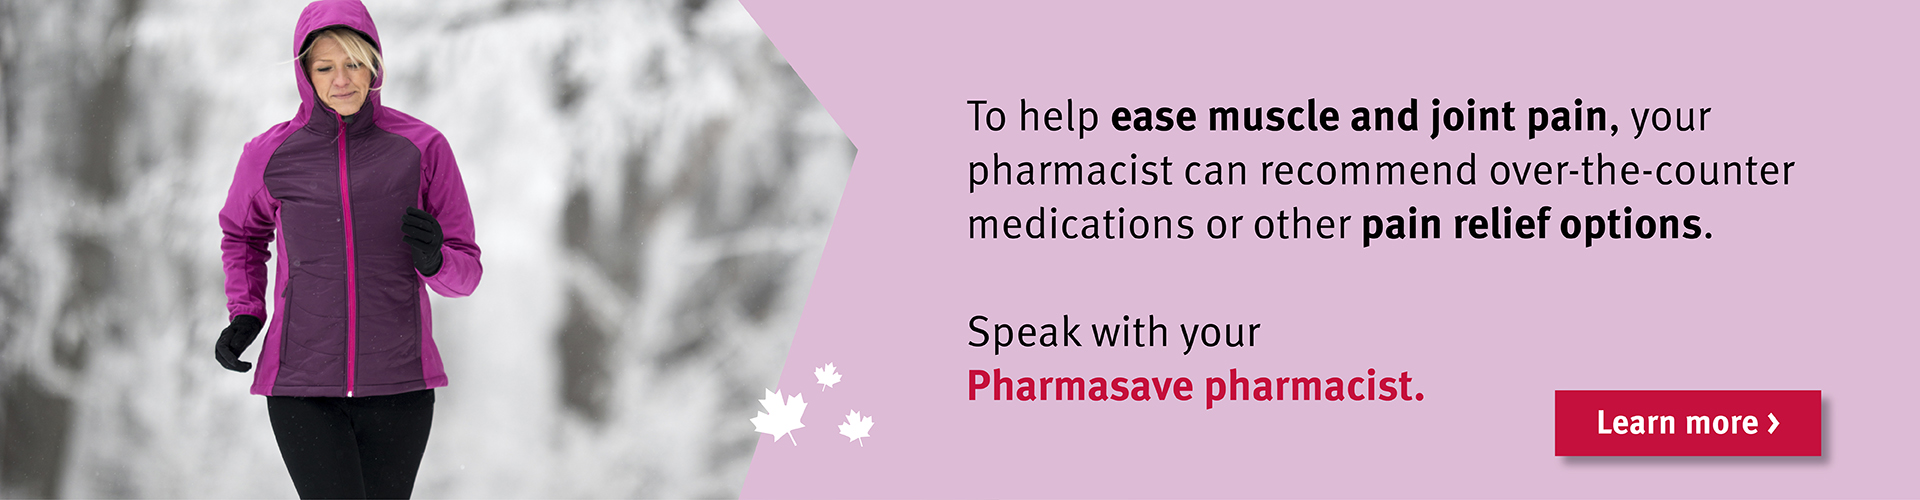 November is Pain Awareness Month. Speak with your Pharmasave pharmacist to help.